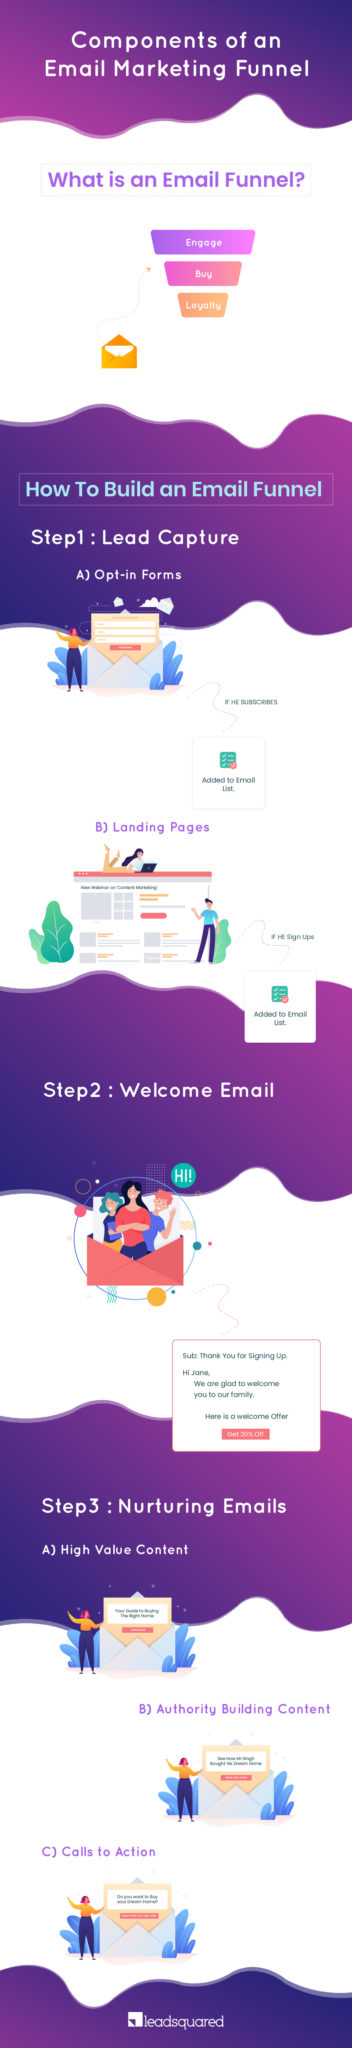 email marketing funnel - infographic